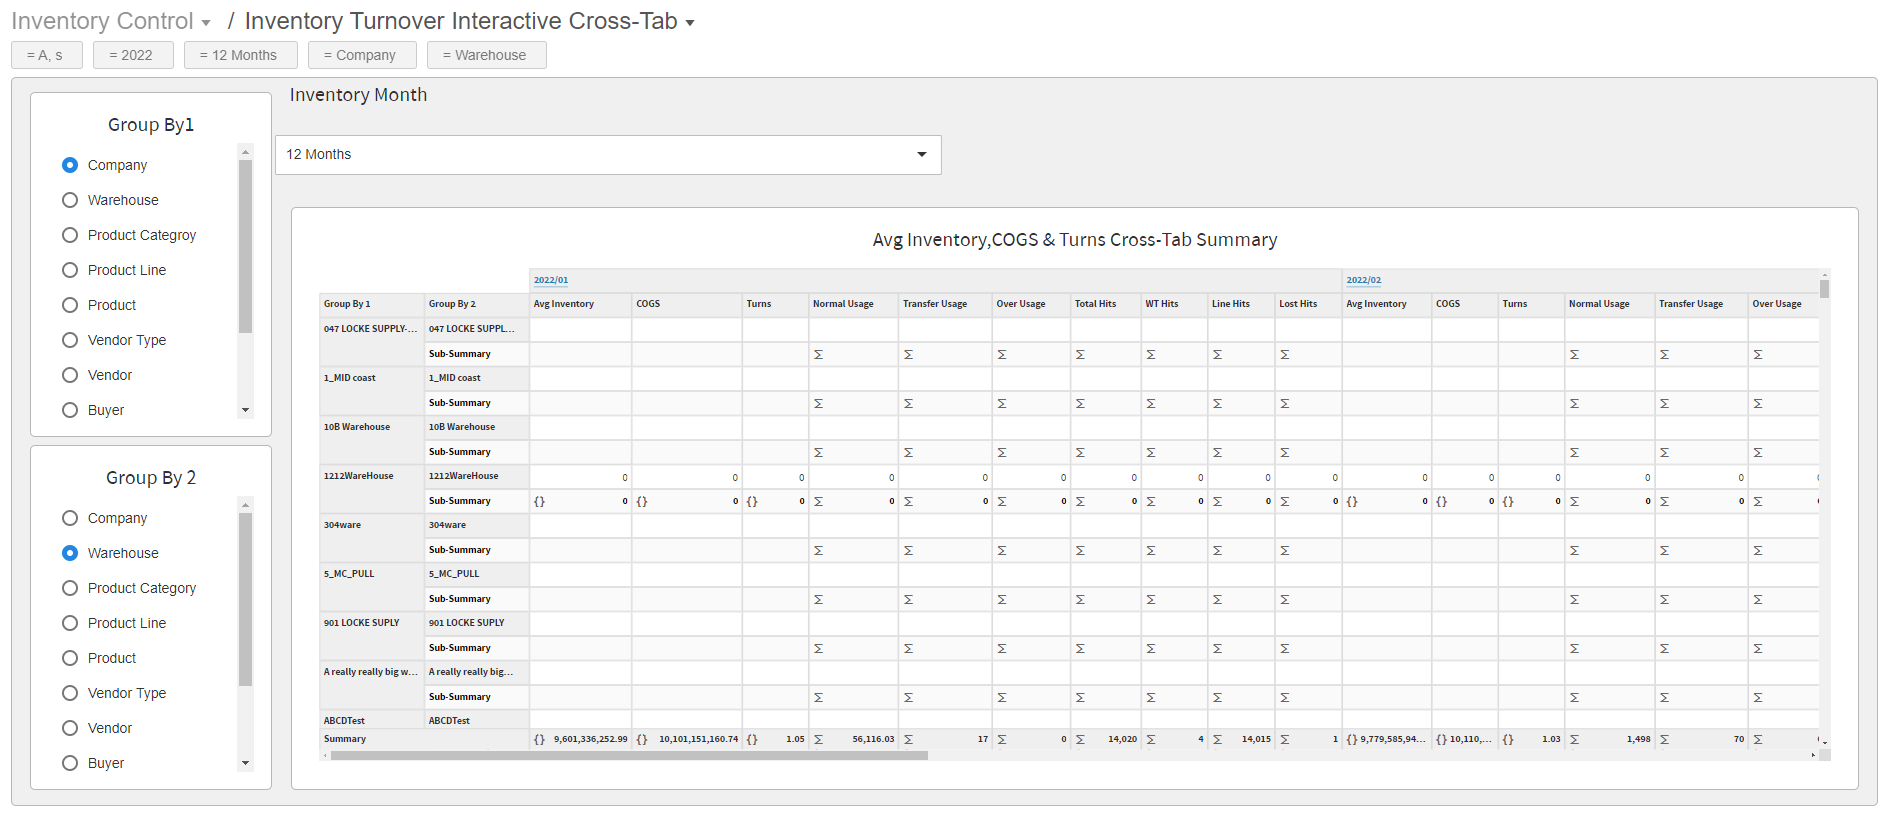 Inventory Turnover Interactive Cross-Tab dashboard